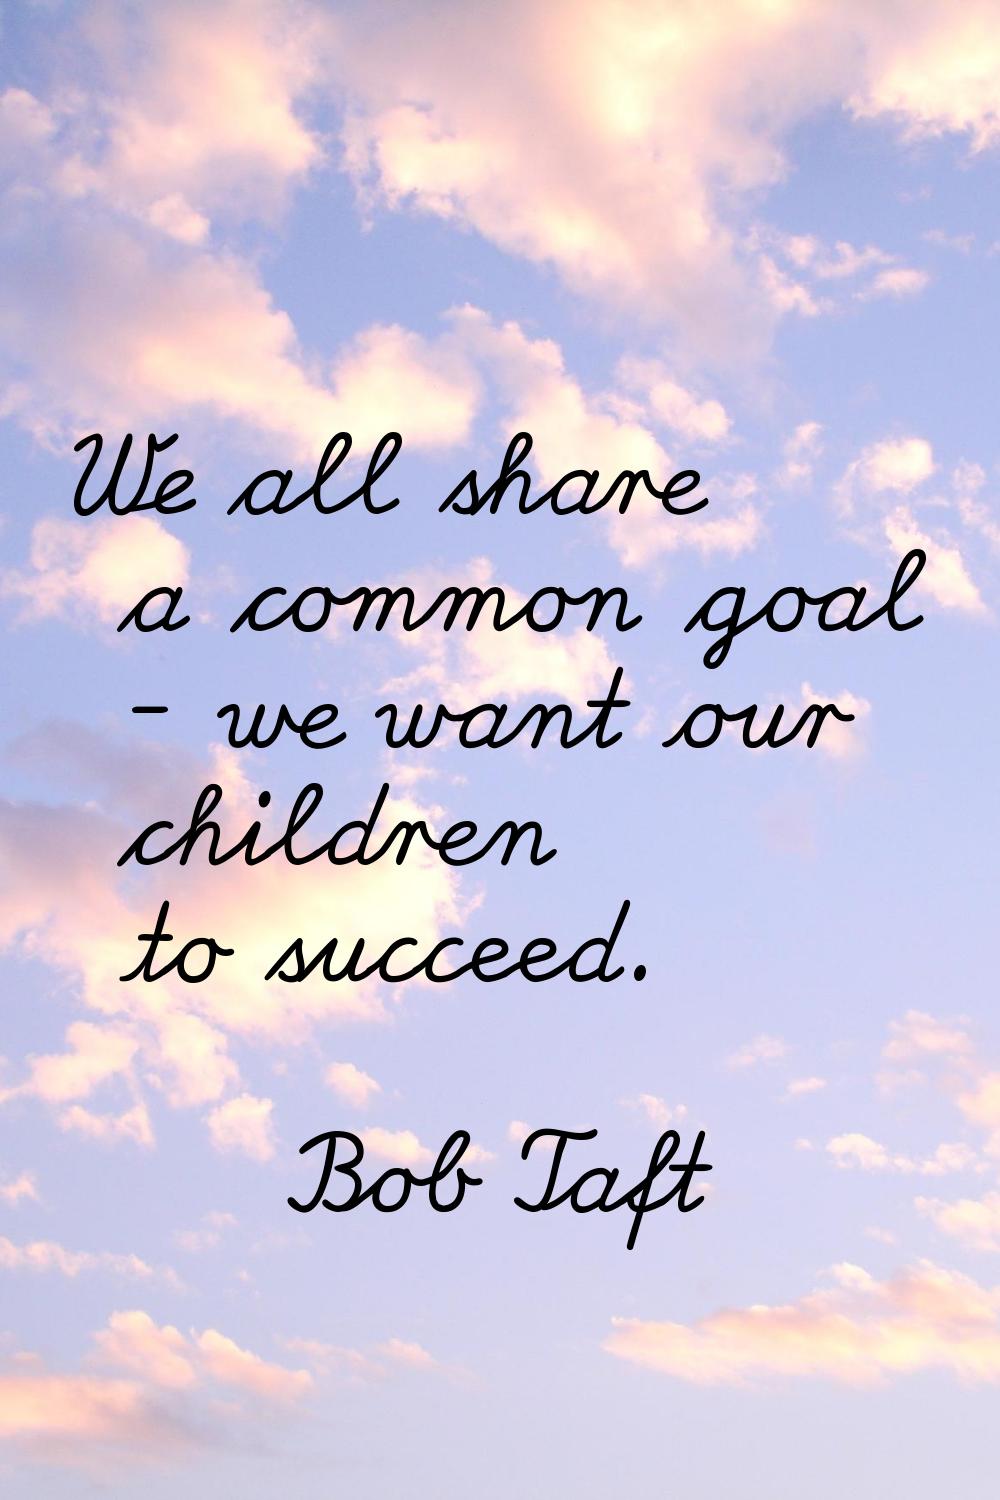 We all share a common goal - we want our children to succeed.